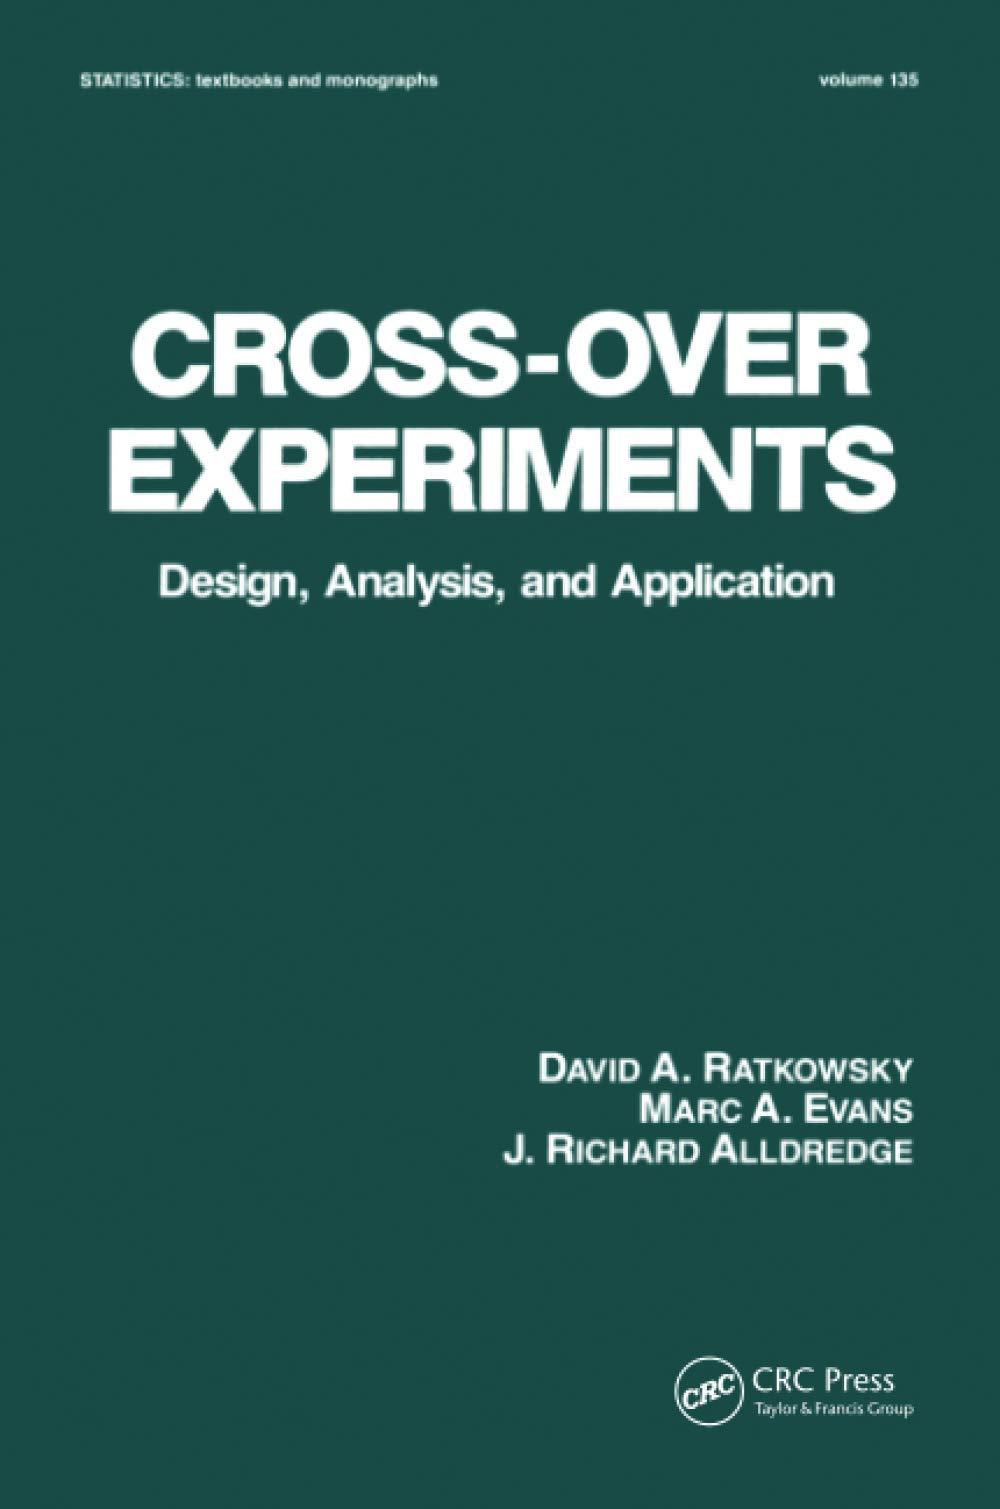 cross over experiments design analysis and application 1st edition david ratkowsky, richard alldredge, marc